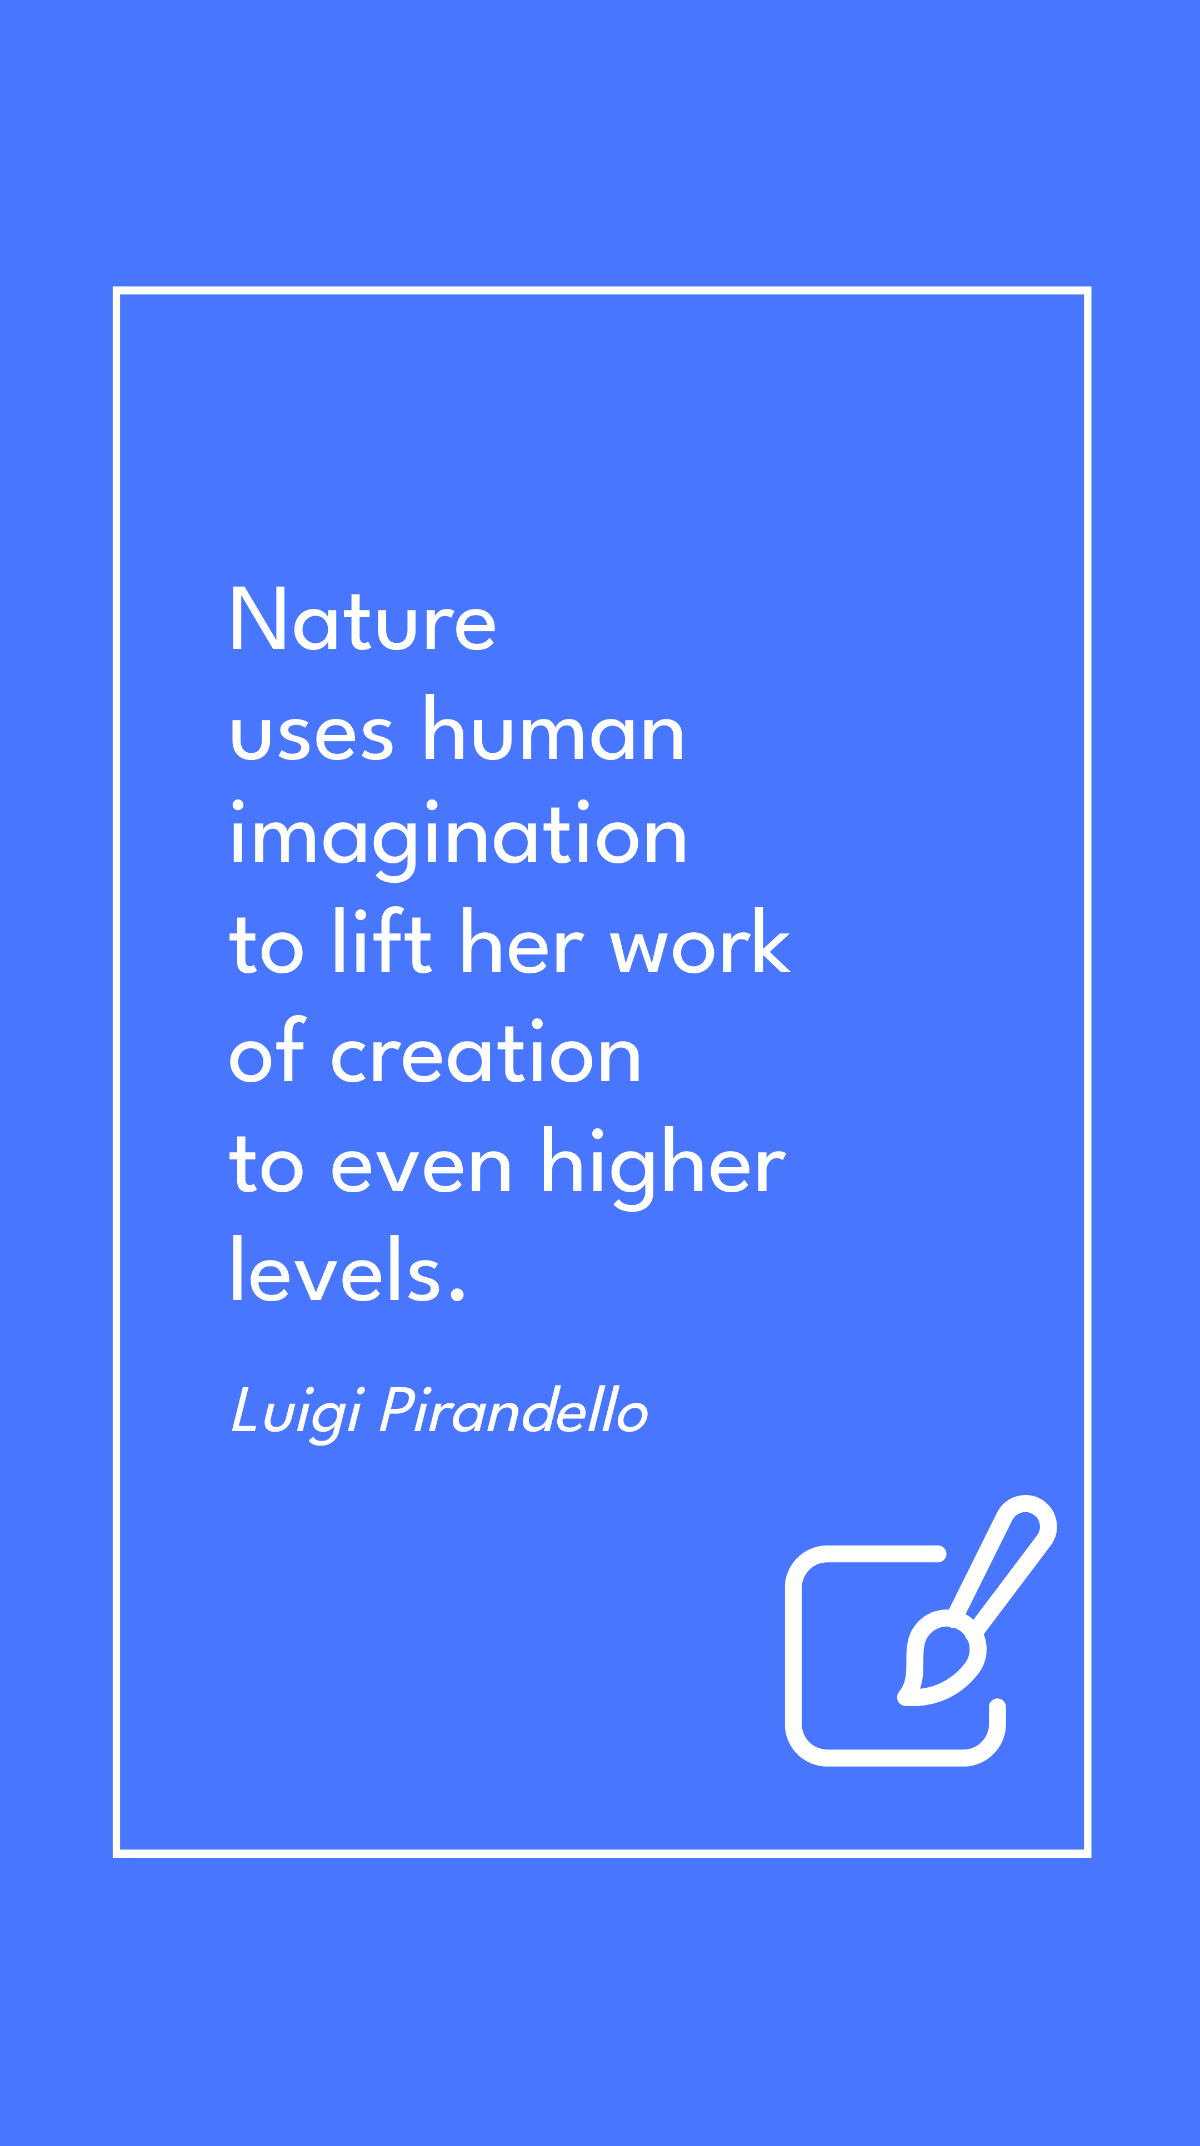 Luigi Pirandello - Nature uses human imagination to lift her work of creation to even higher levels. Template